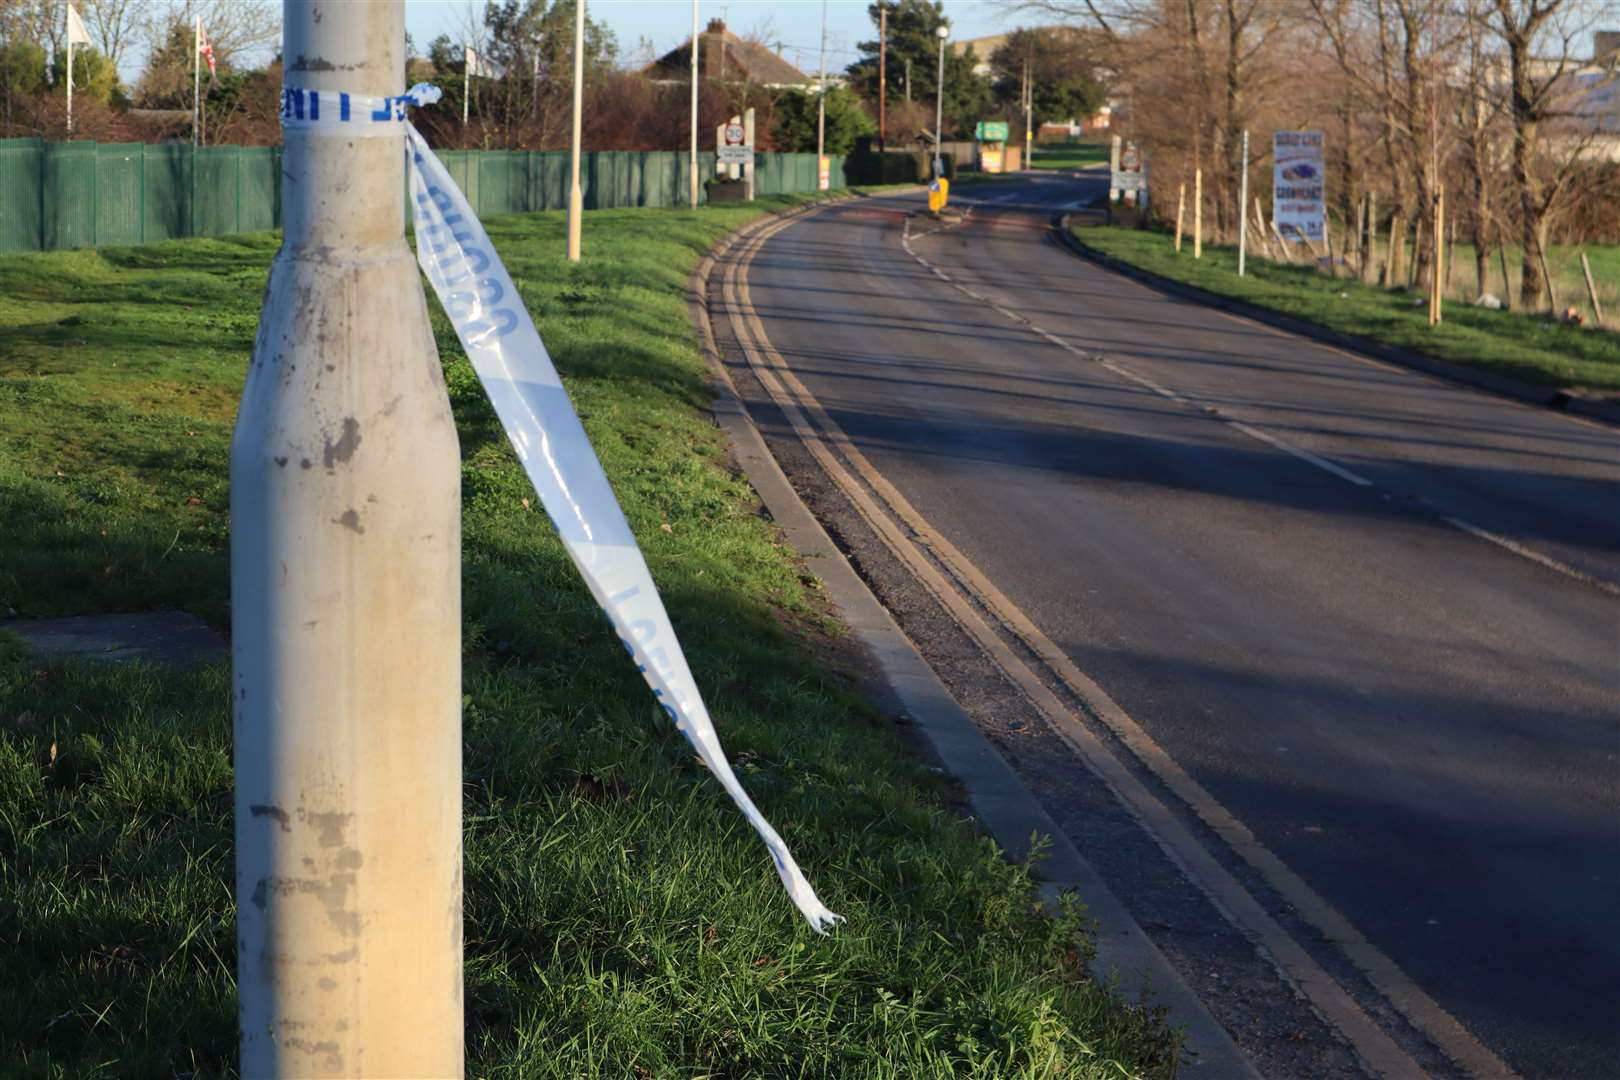 Police tape at the scene of the tragedy, on Sheppey